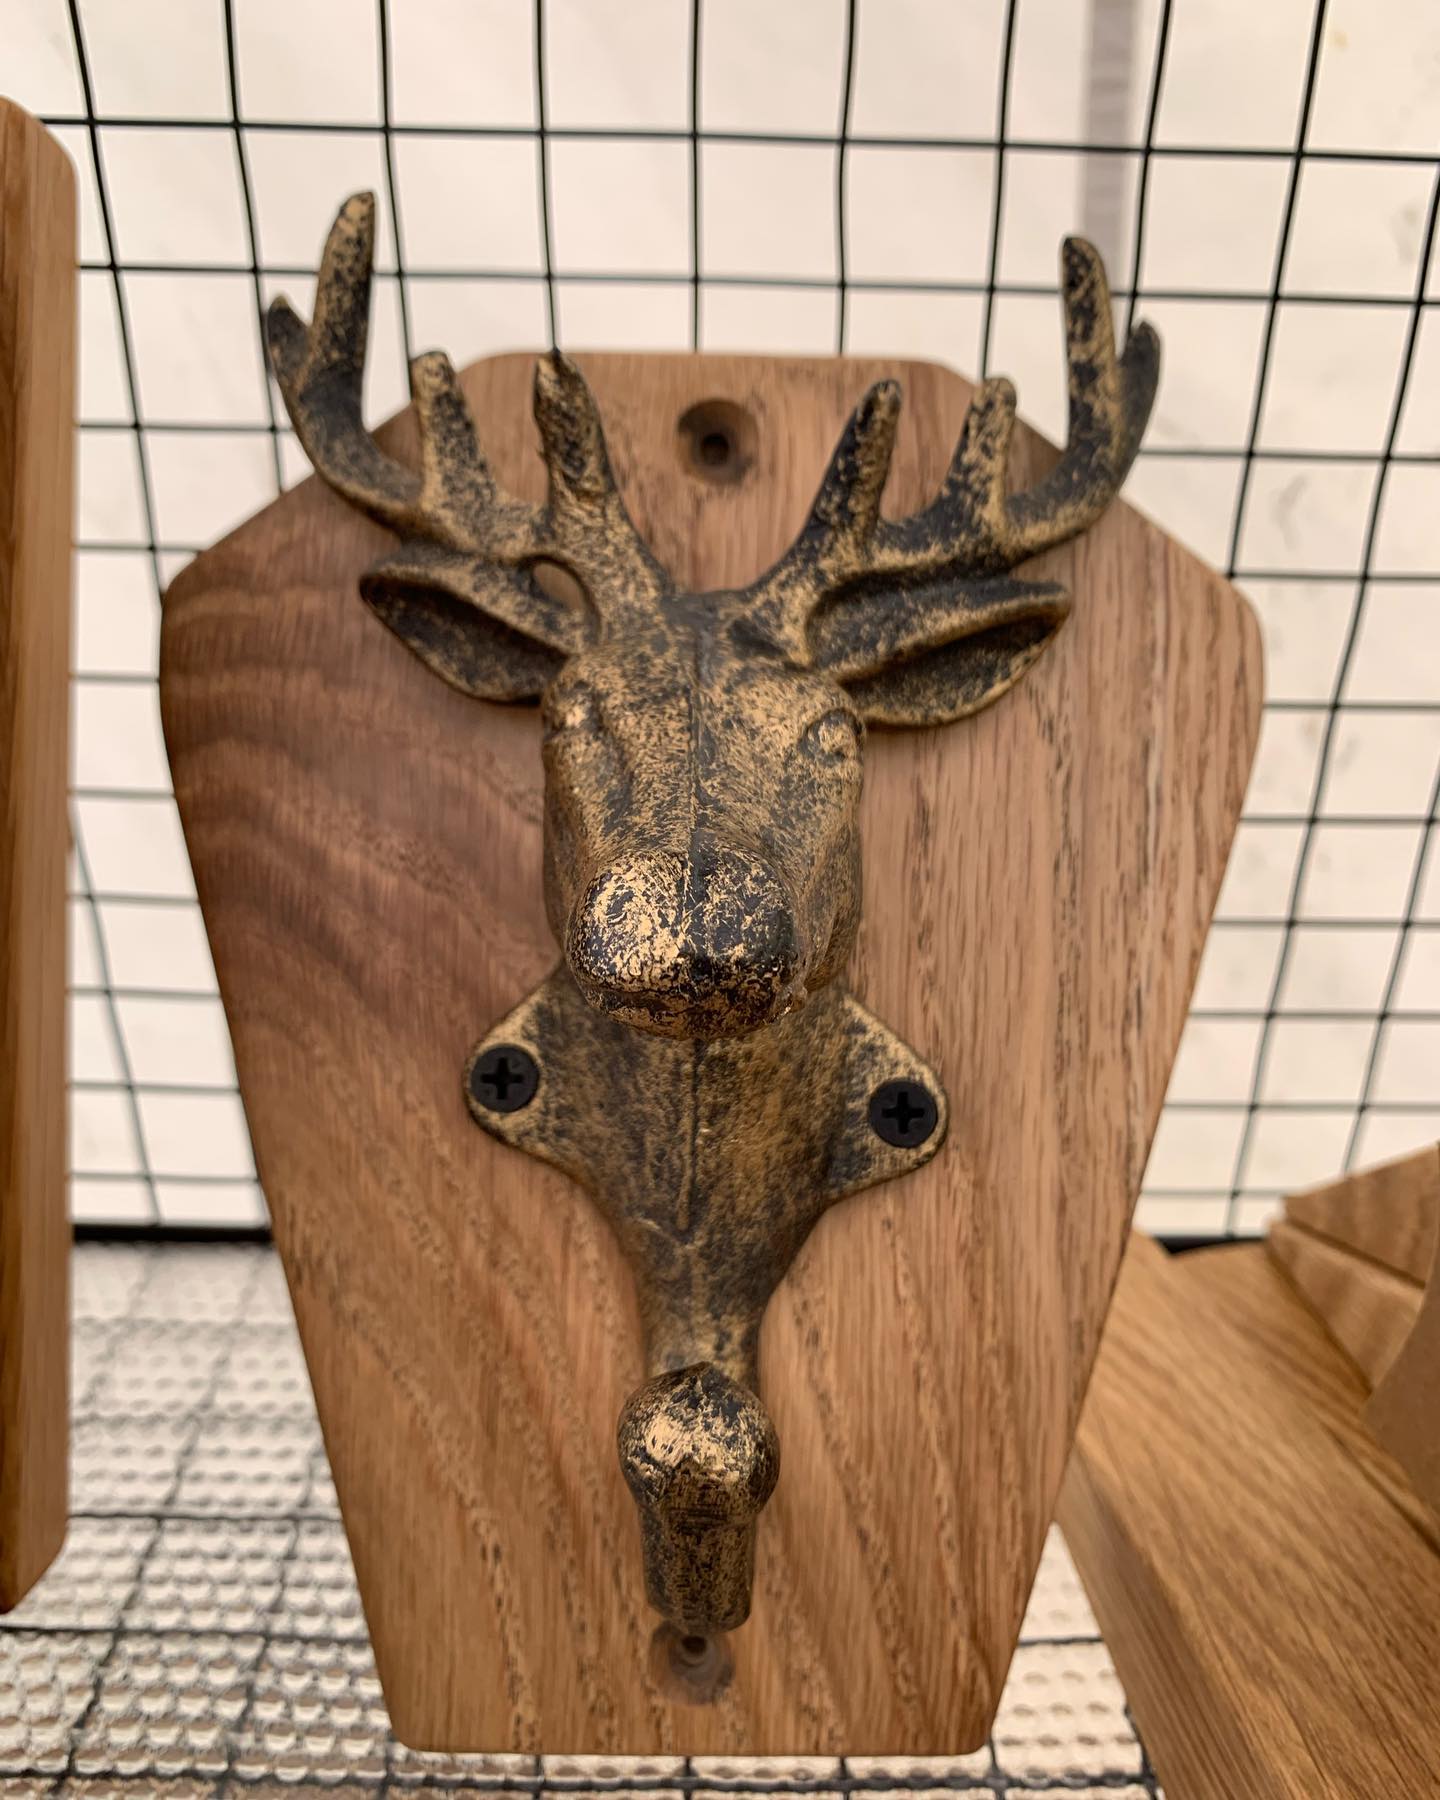 New product for our last market of the year! Stag head hook mounted on oak-£19 (only 2 available) #newproduct #feelingfestive #homedwcor #handcrafted #home #gingerandtweed @bathartisan